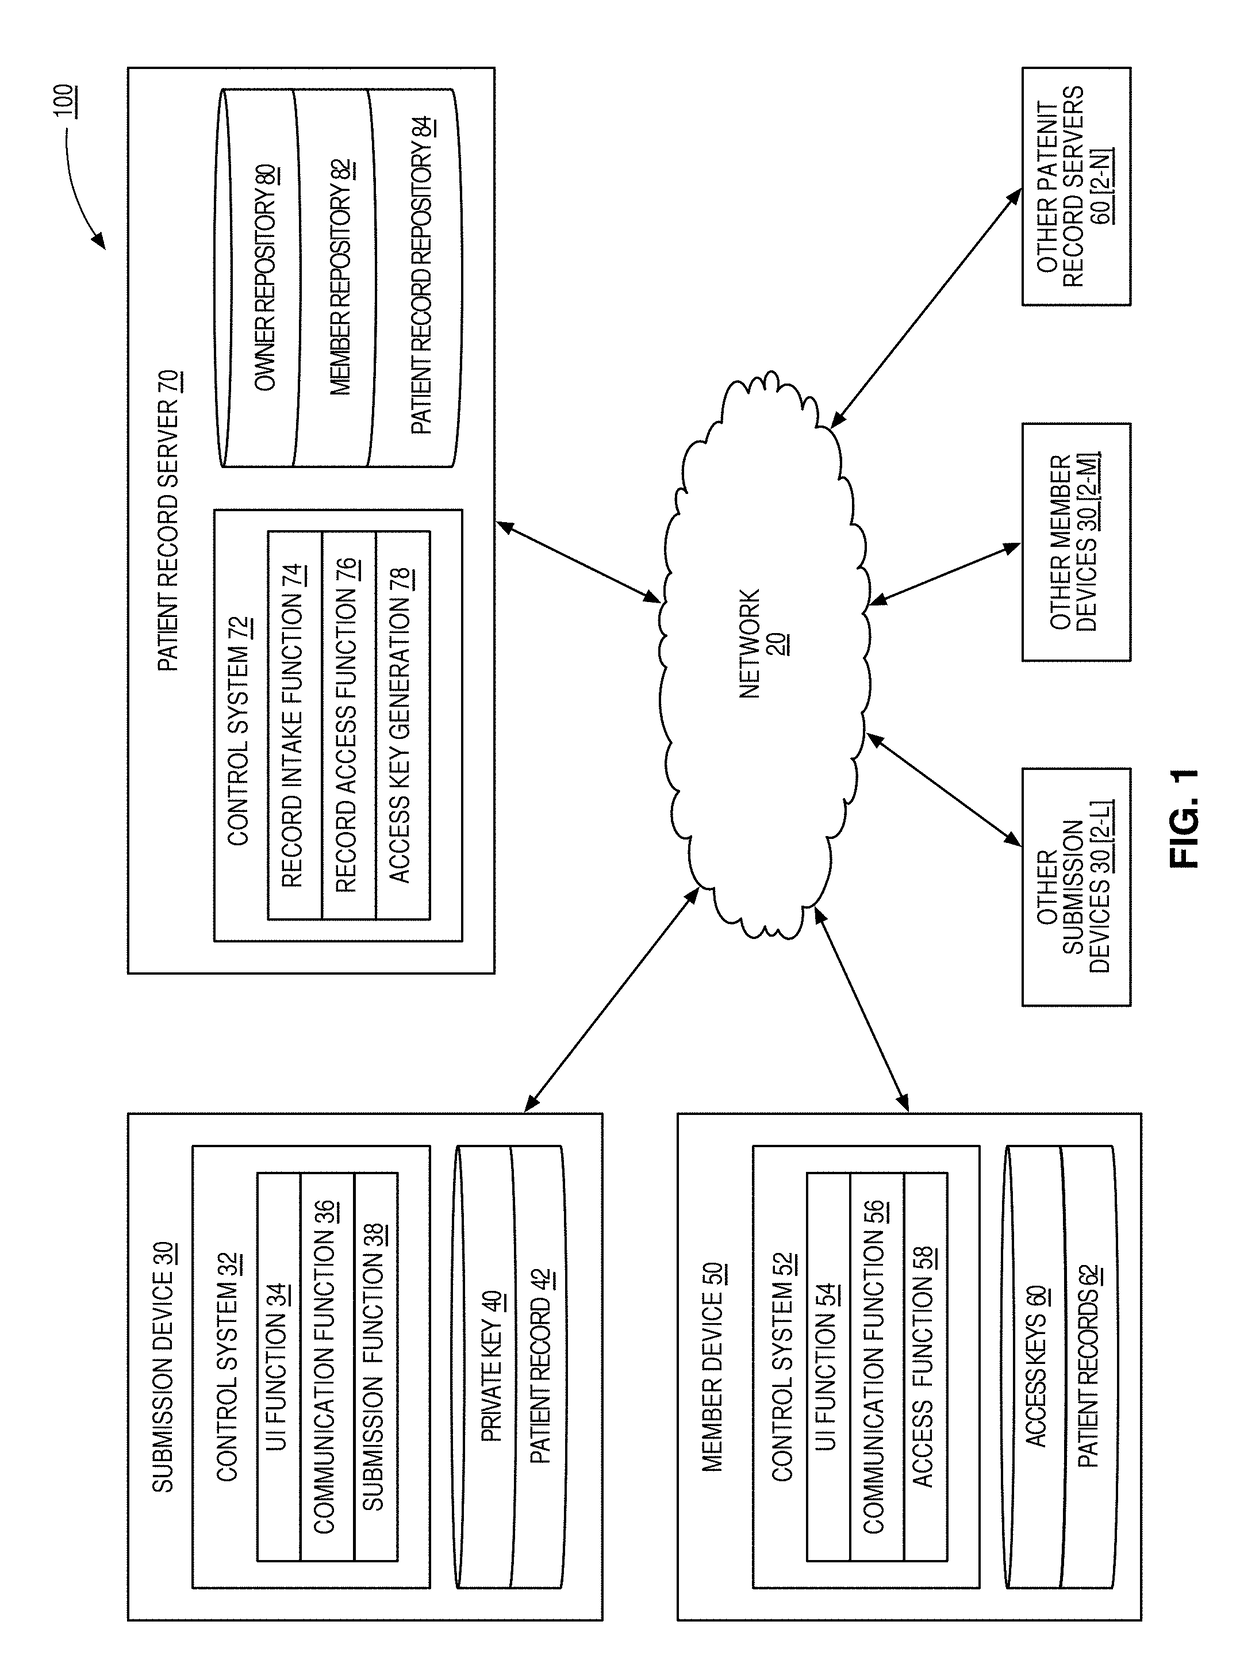 Distributed systems for secure storage and retrieval of encrypted biological specimen data